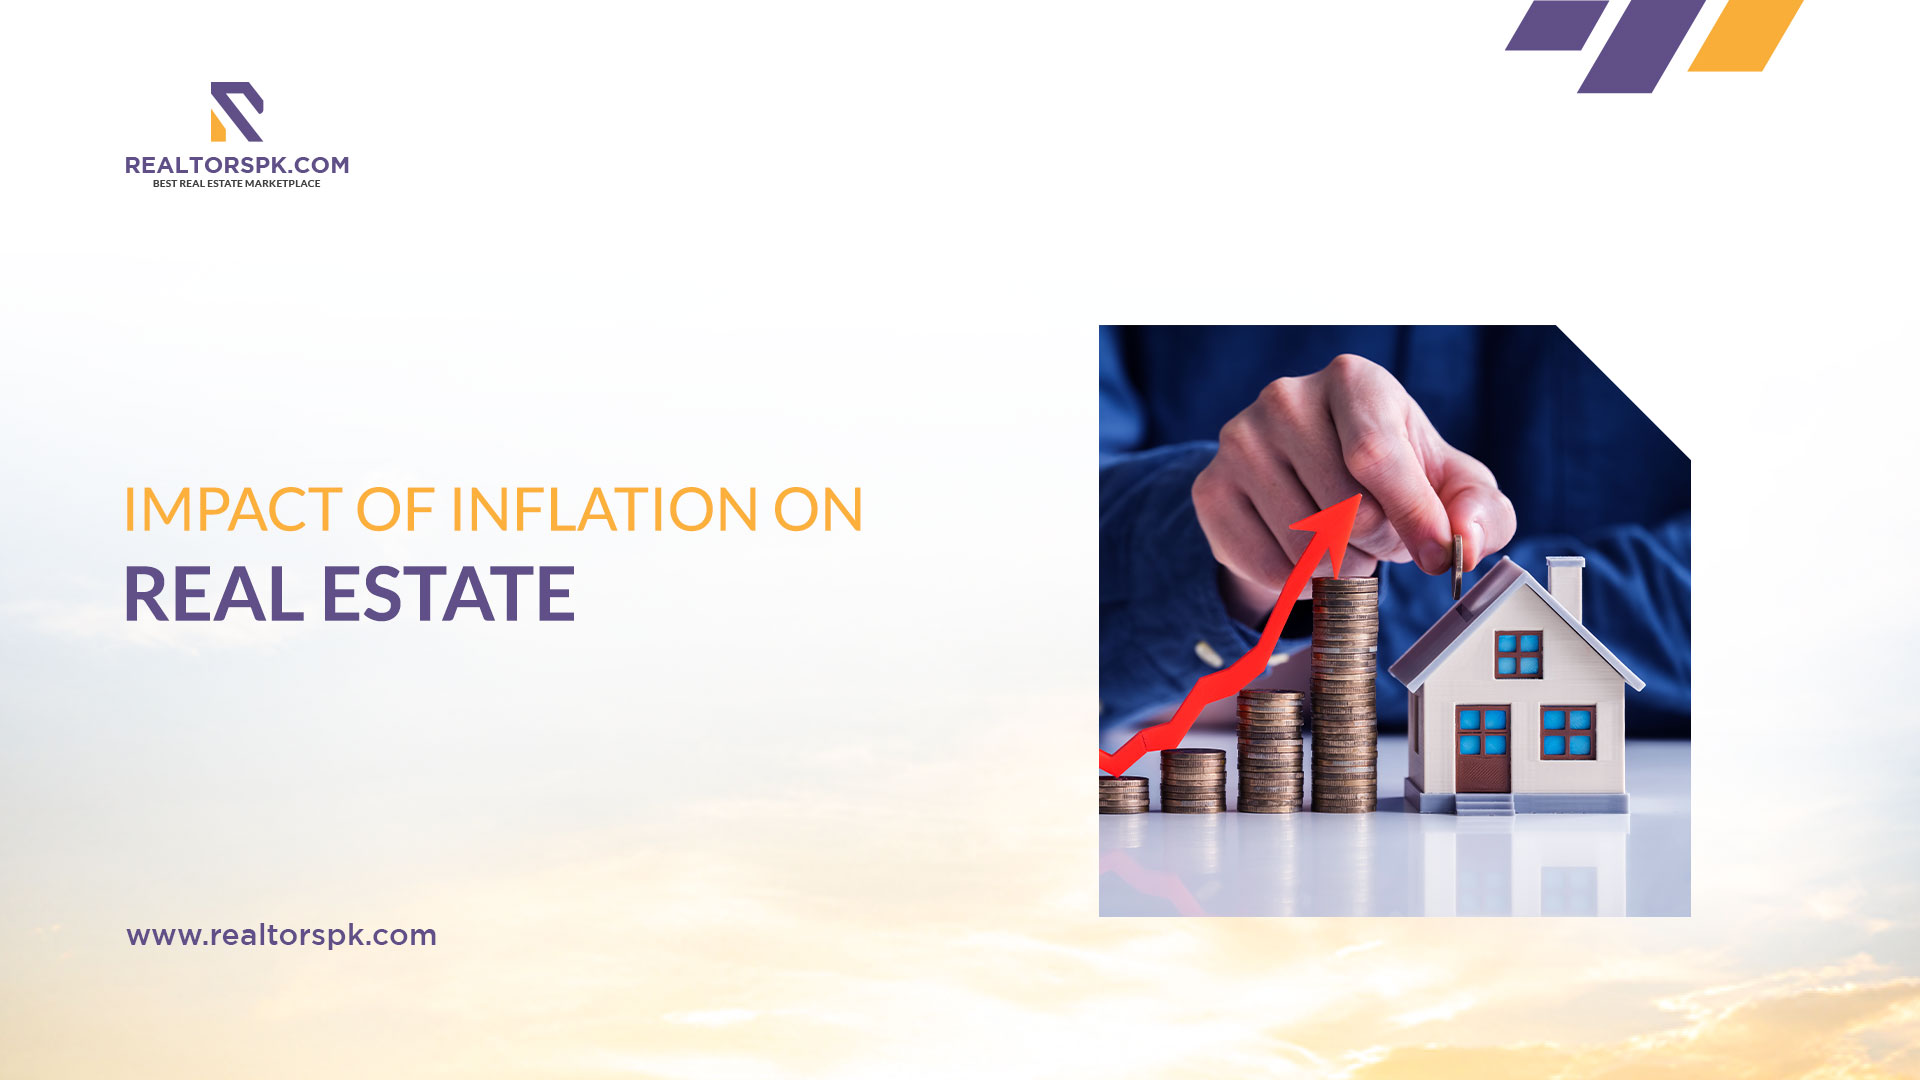 Impact of inflation on real estate